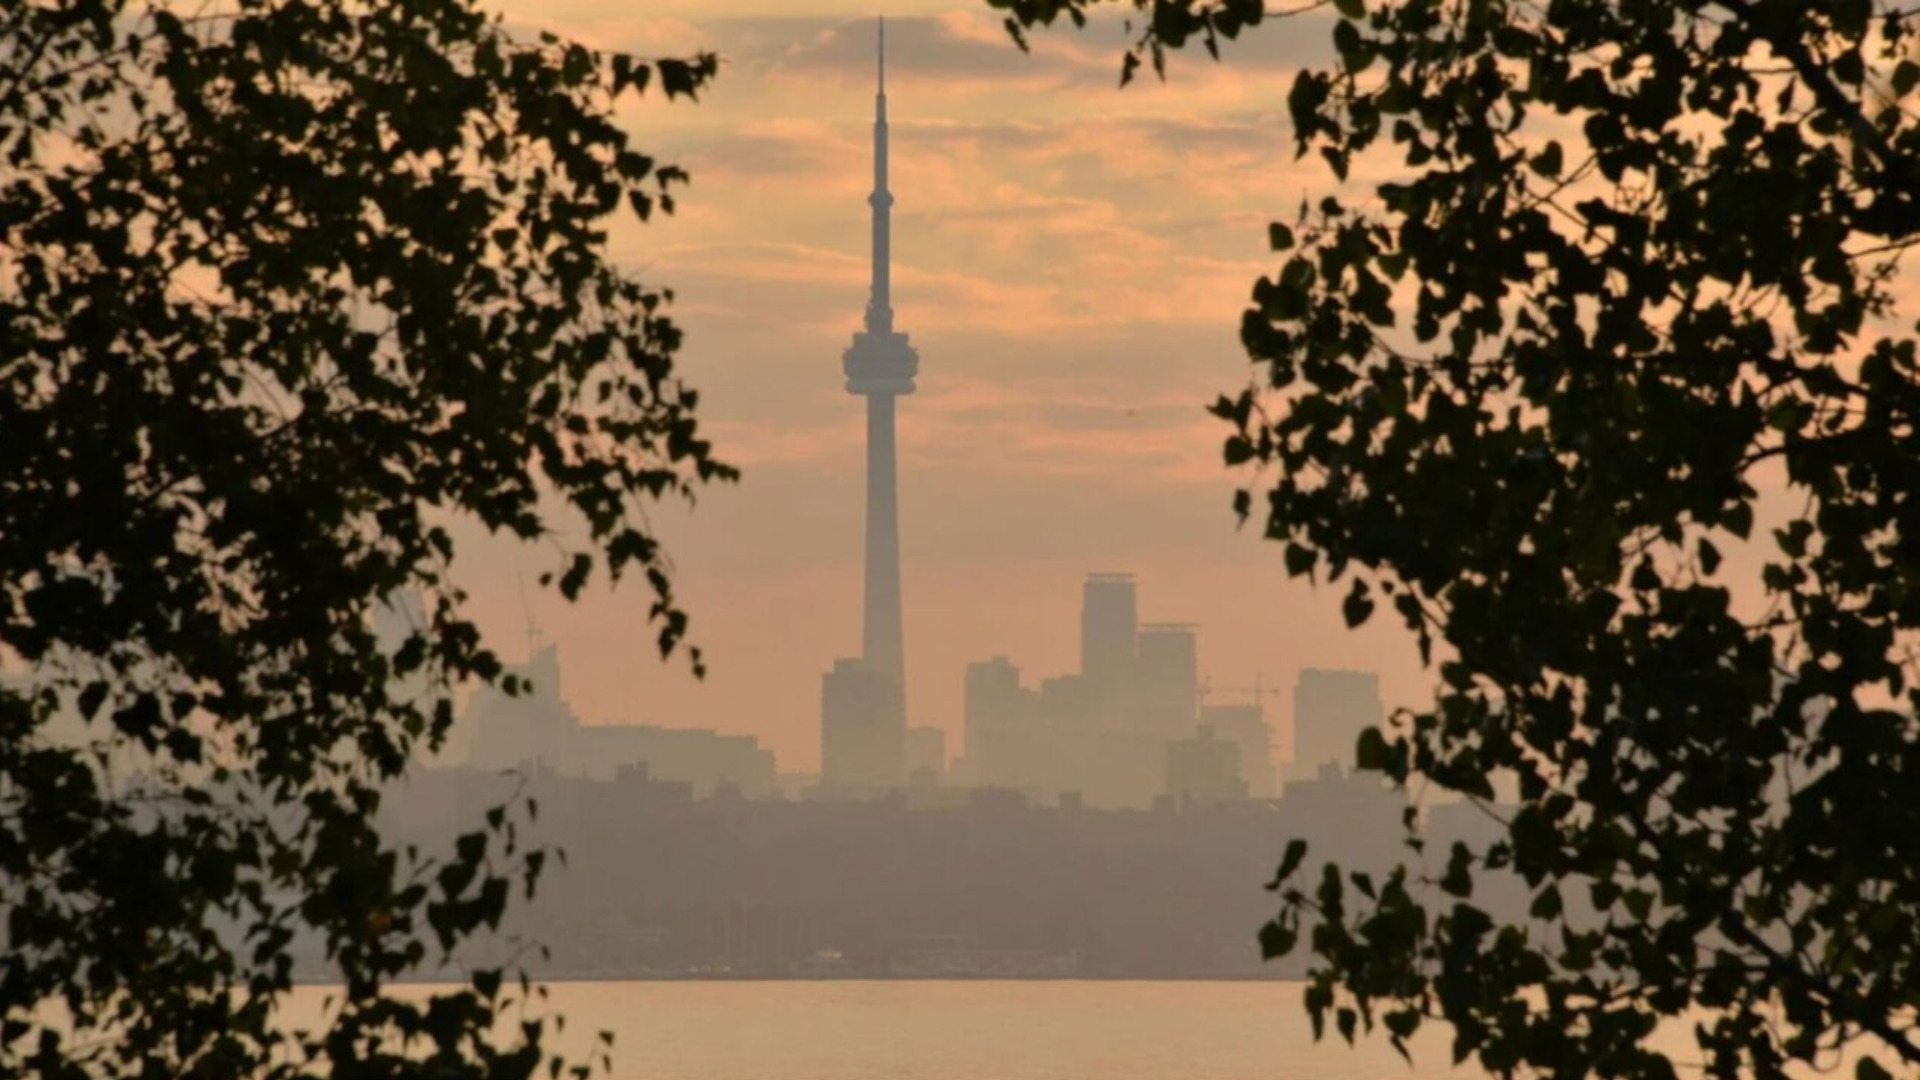 Today is the worst day for air quality across the GTA